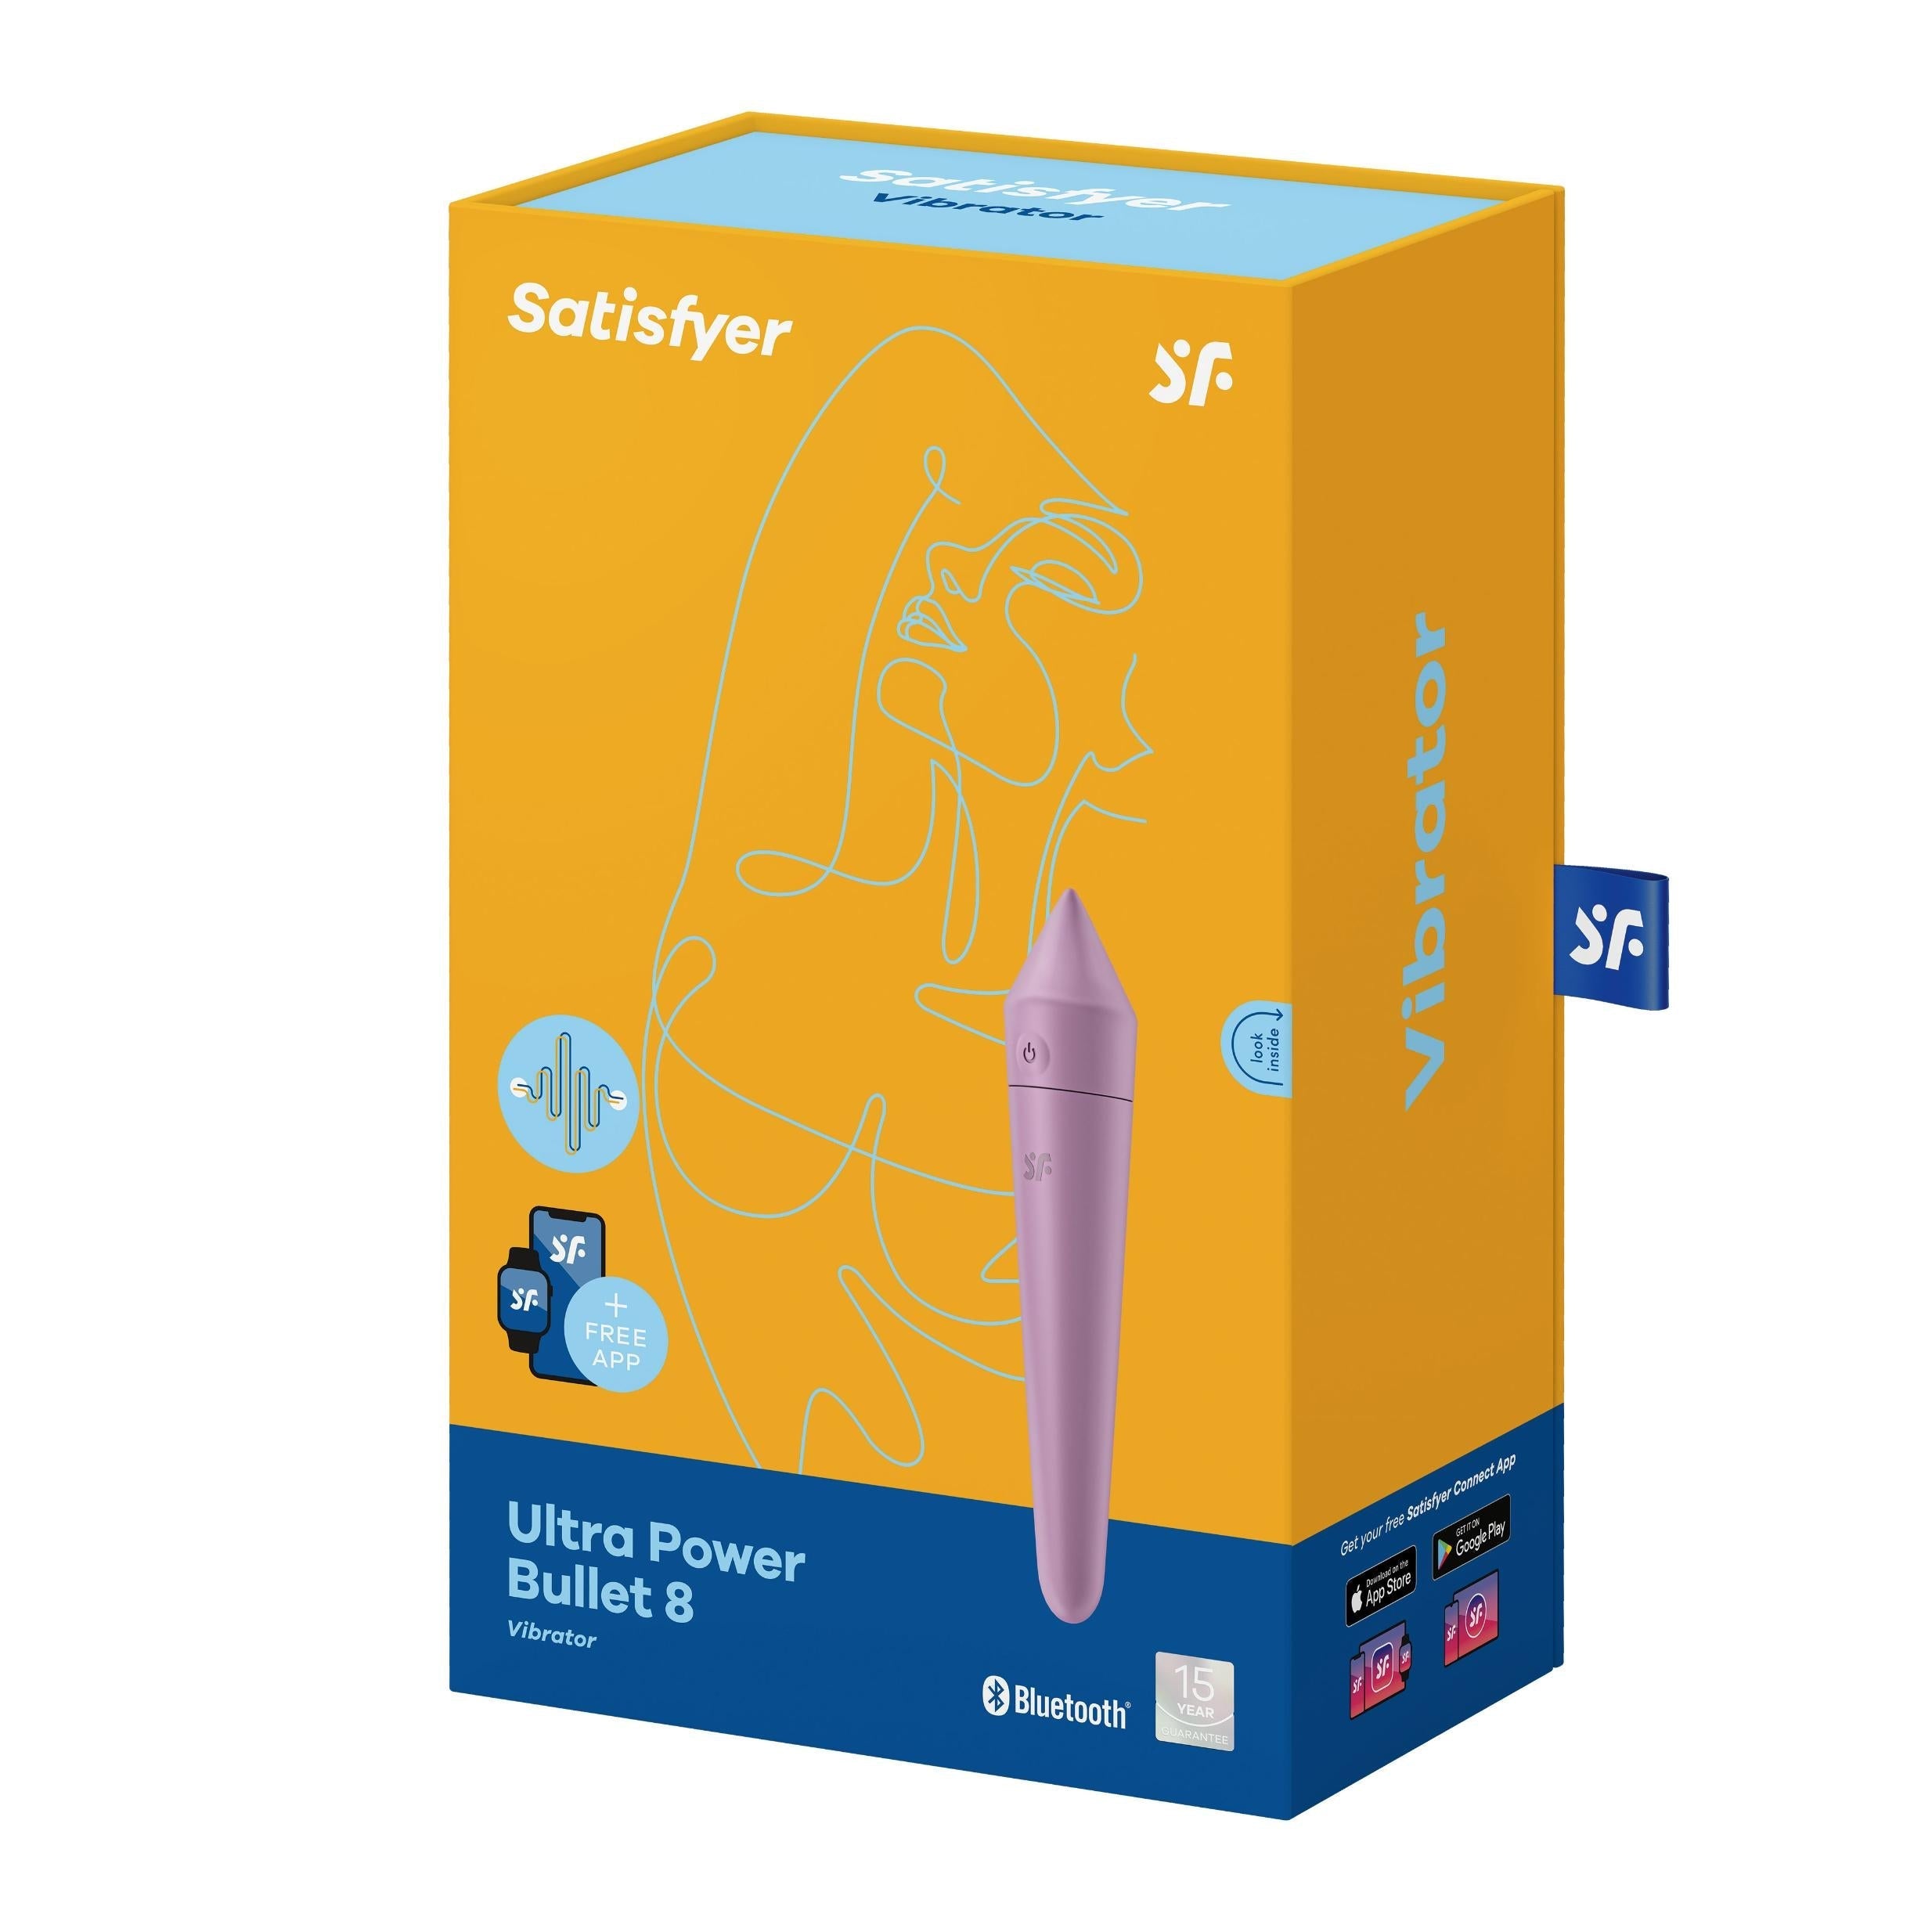 Satisfyer Ultra Power Bullet 8  Vibrator - Turquoise Lilac